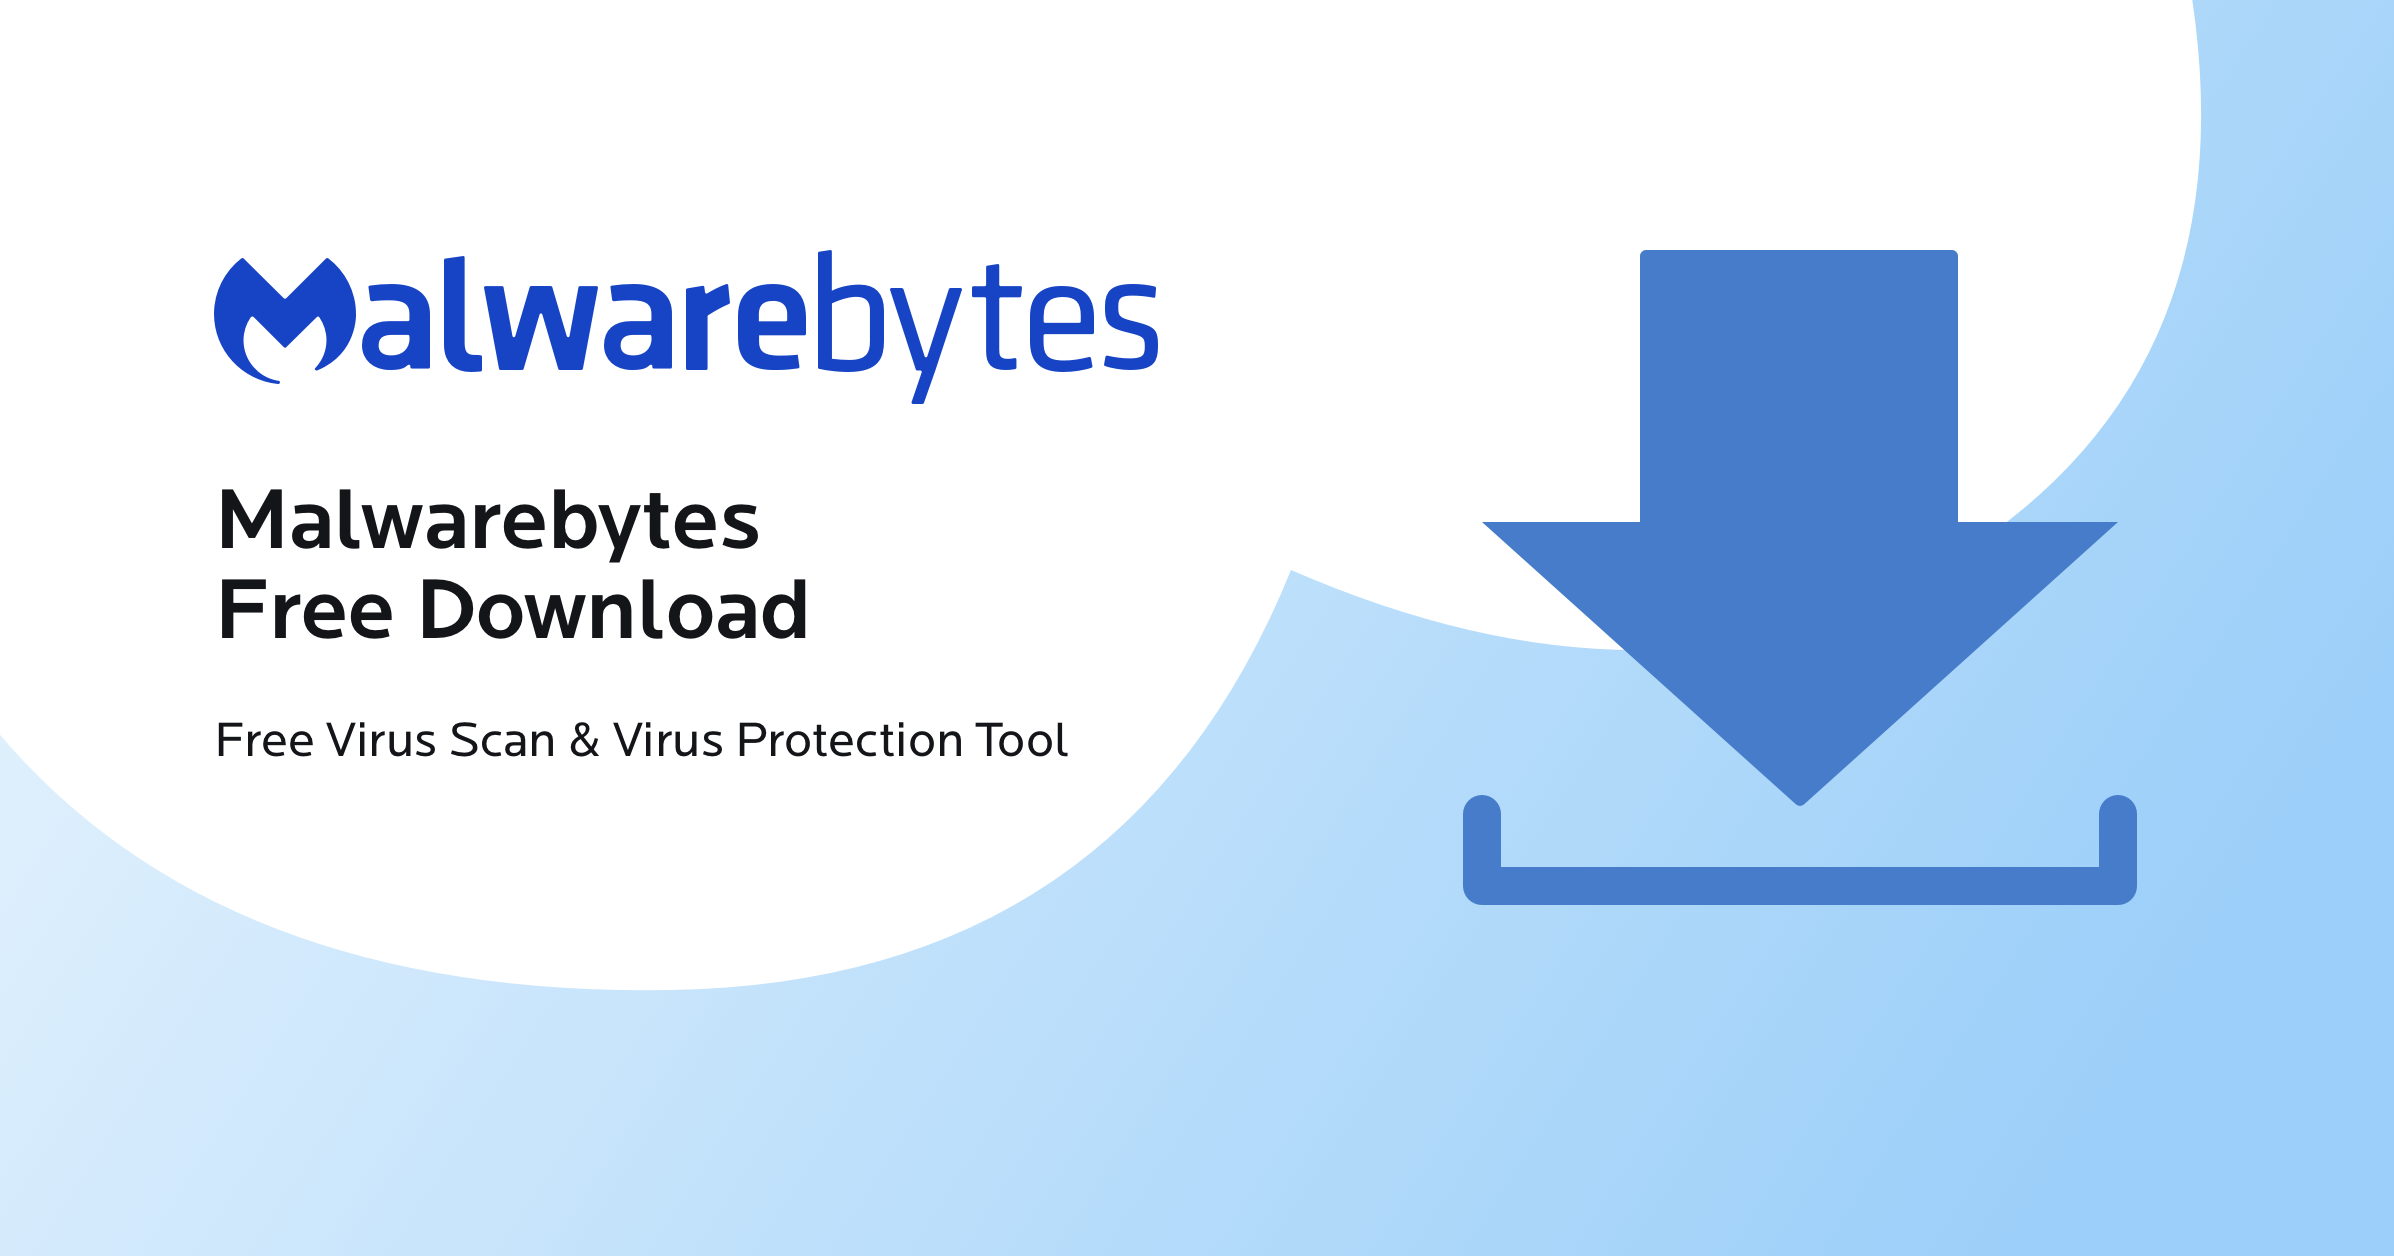 Download and install a reputable anti-malware tool.
Update the anti-malware software to ensure it has the latest malware definitions.